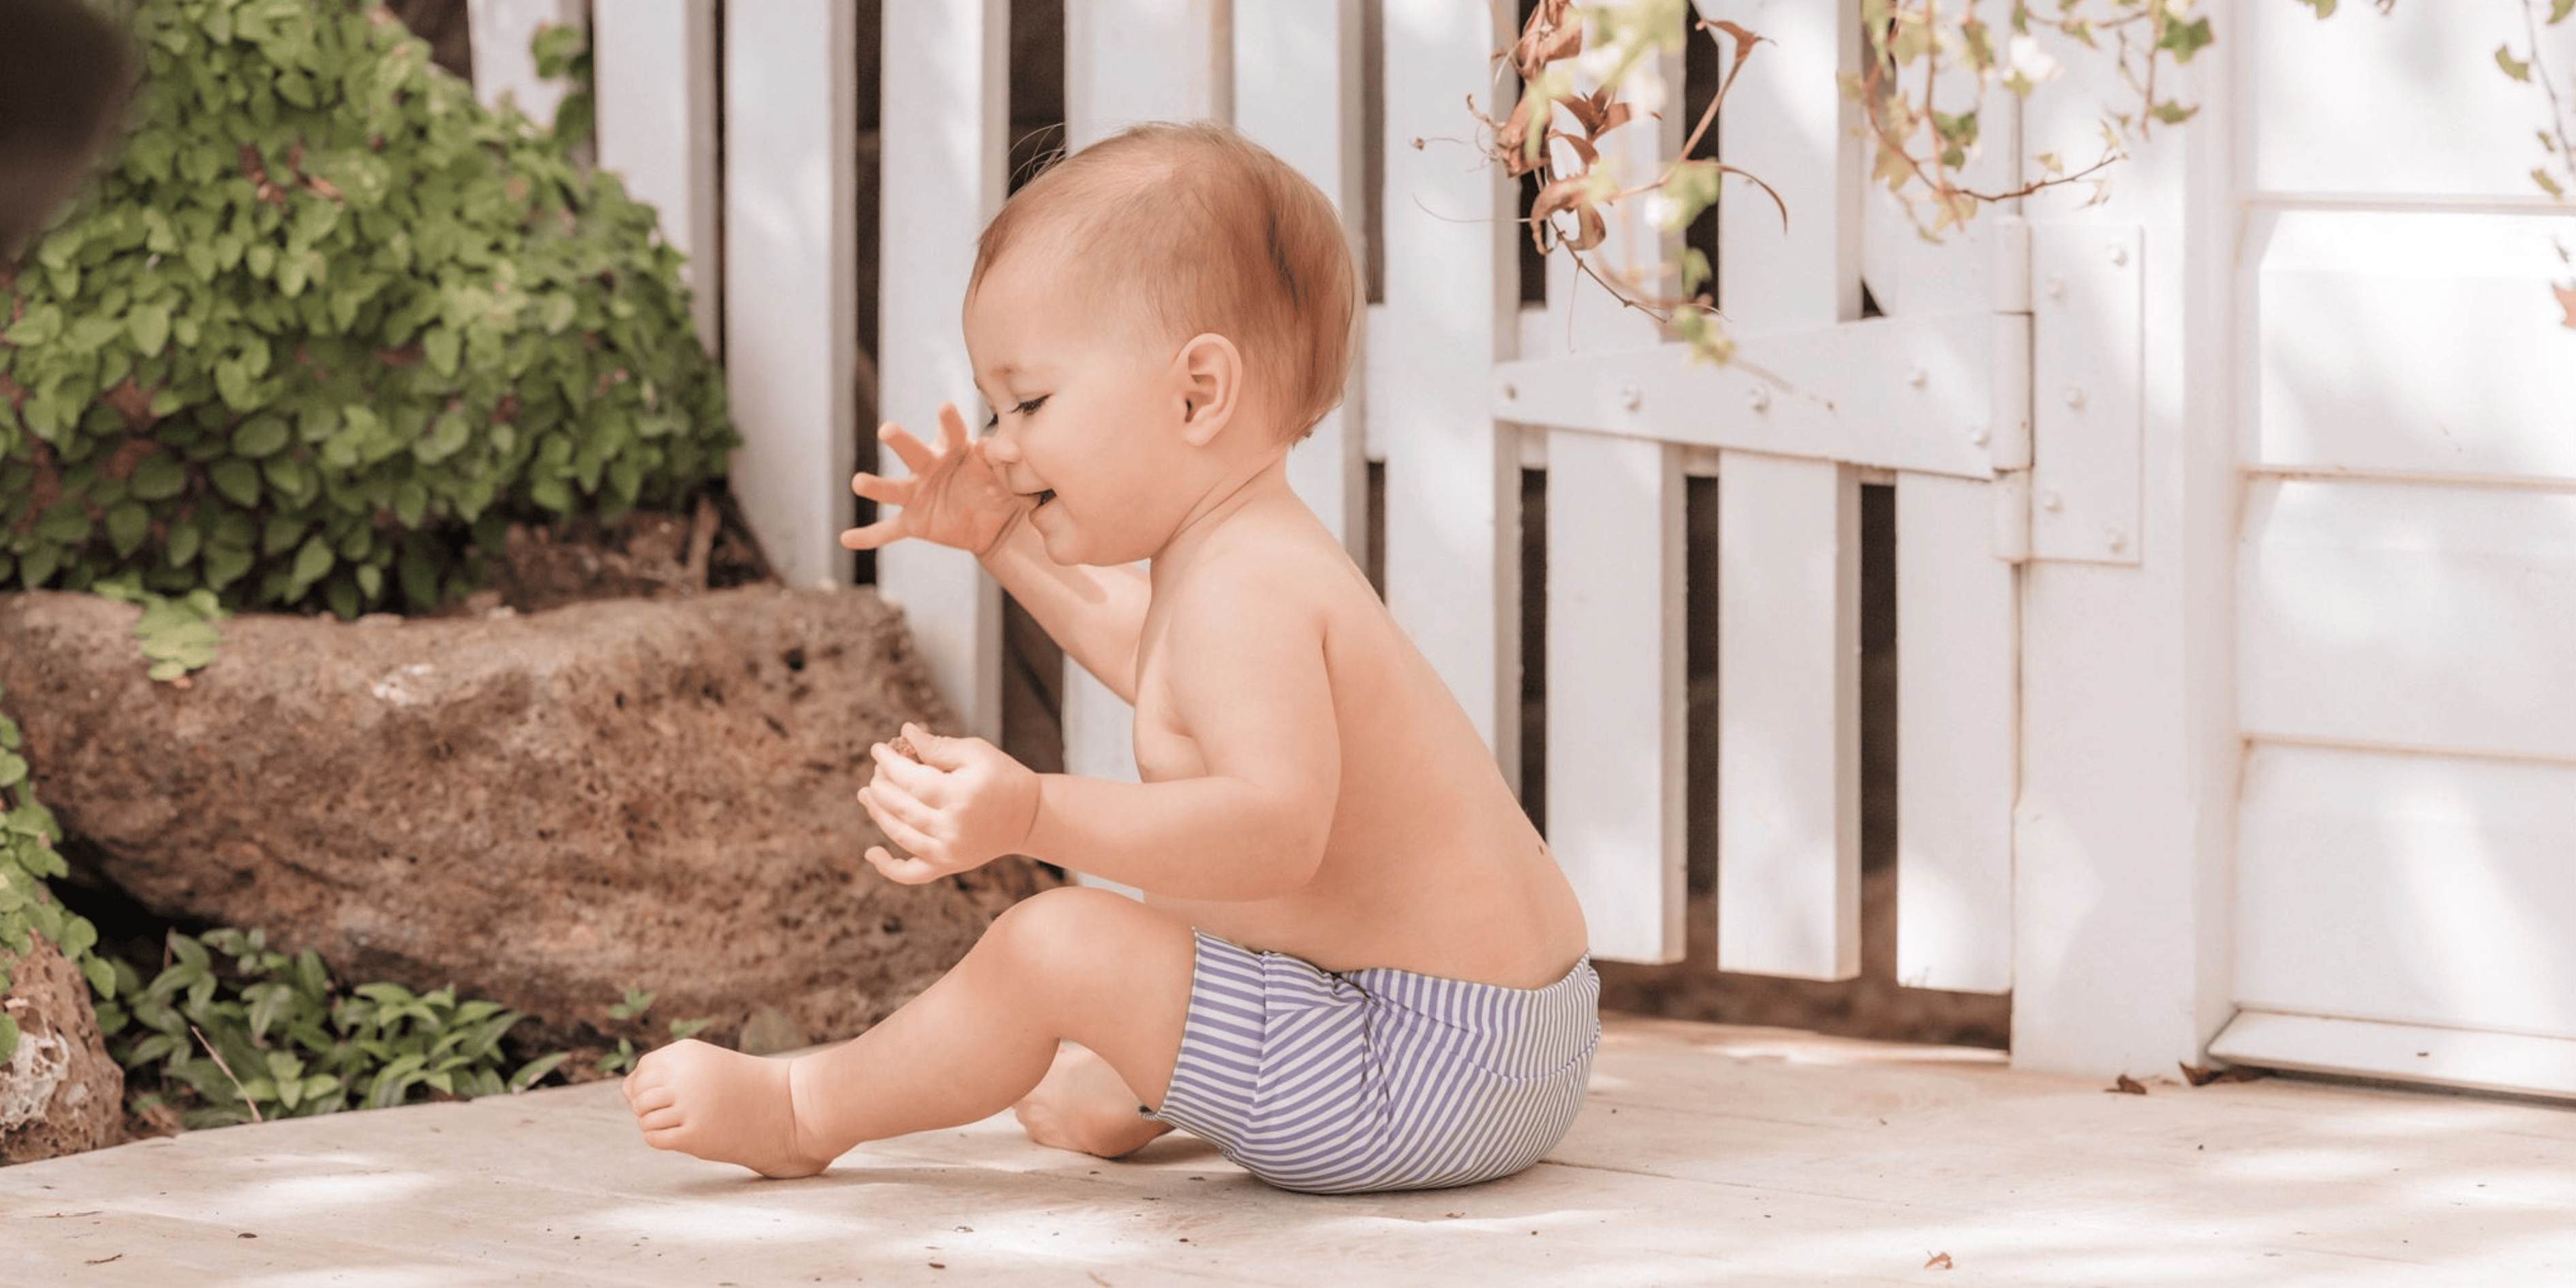 A baby is sitting on the ground in front of a sustainable, eco-friendly fence.